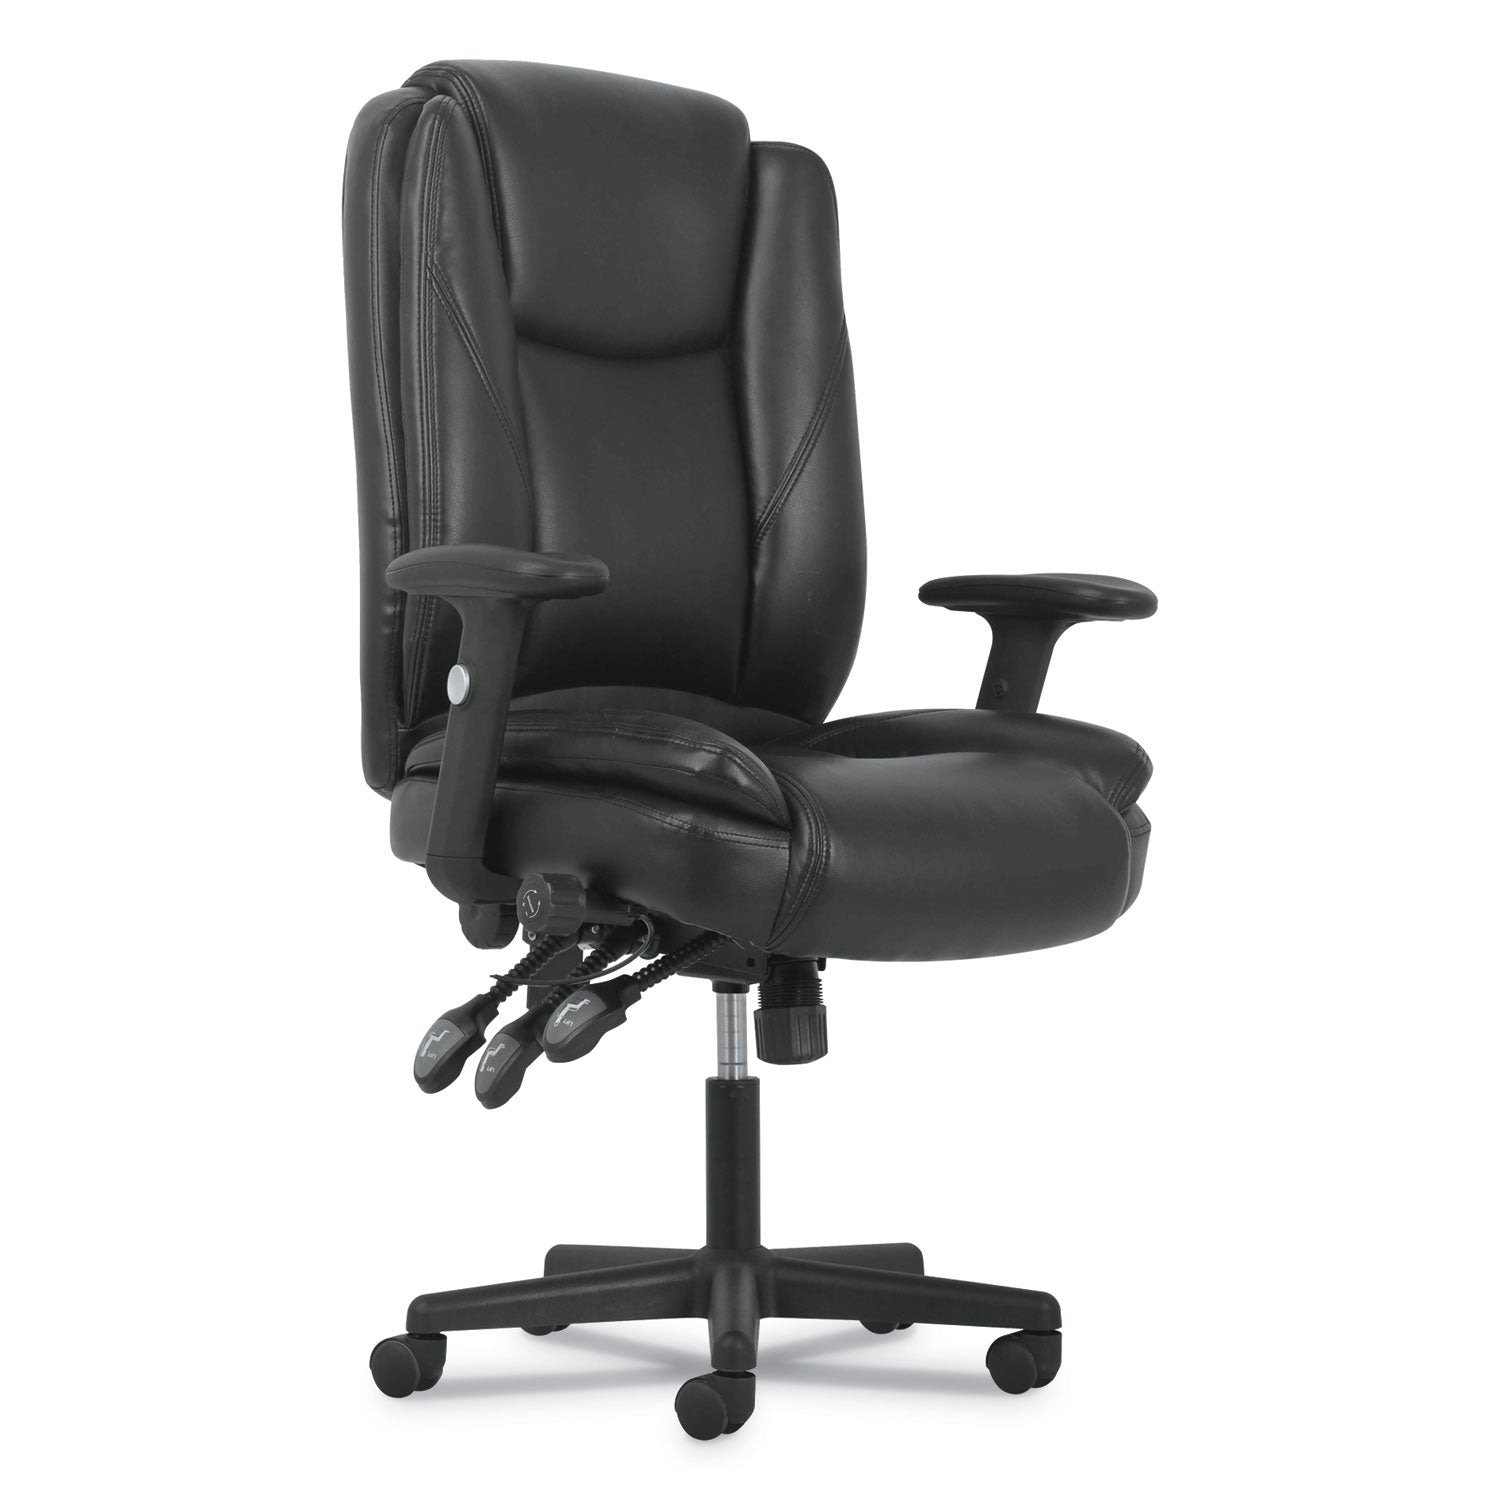 high-back-executive-chair-supports-up-to-225-lb-17-to-20-seat-height-black_bsxvst331 - 1